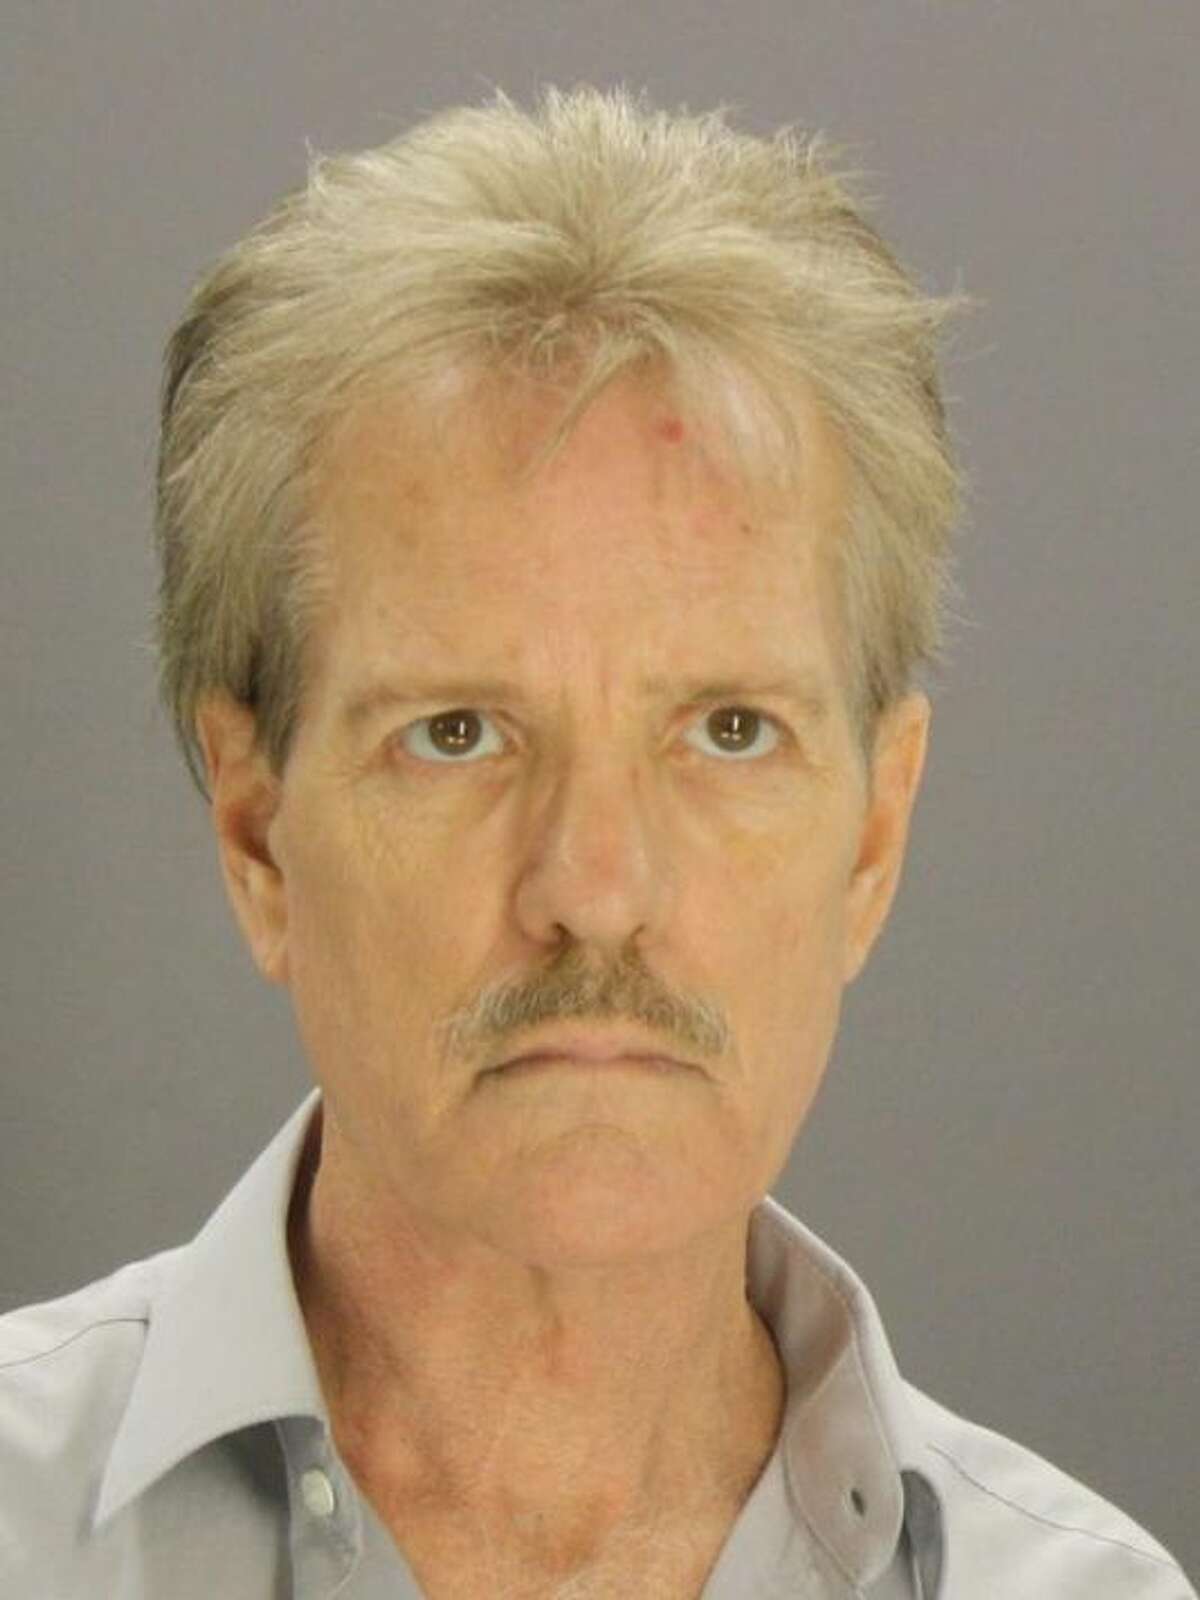 Bradley Glenn Boley, 61, is being tried on charges of animal cruelty in Dallas. (Photo: Dallas County Jail)